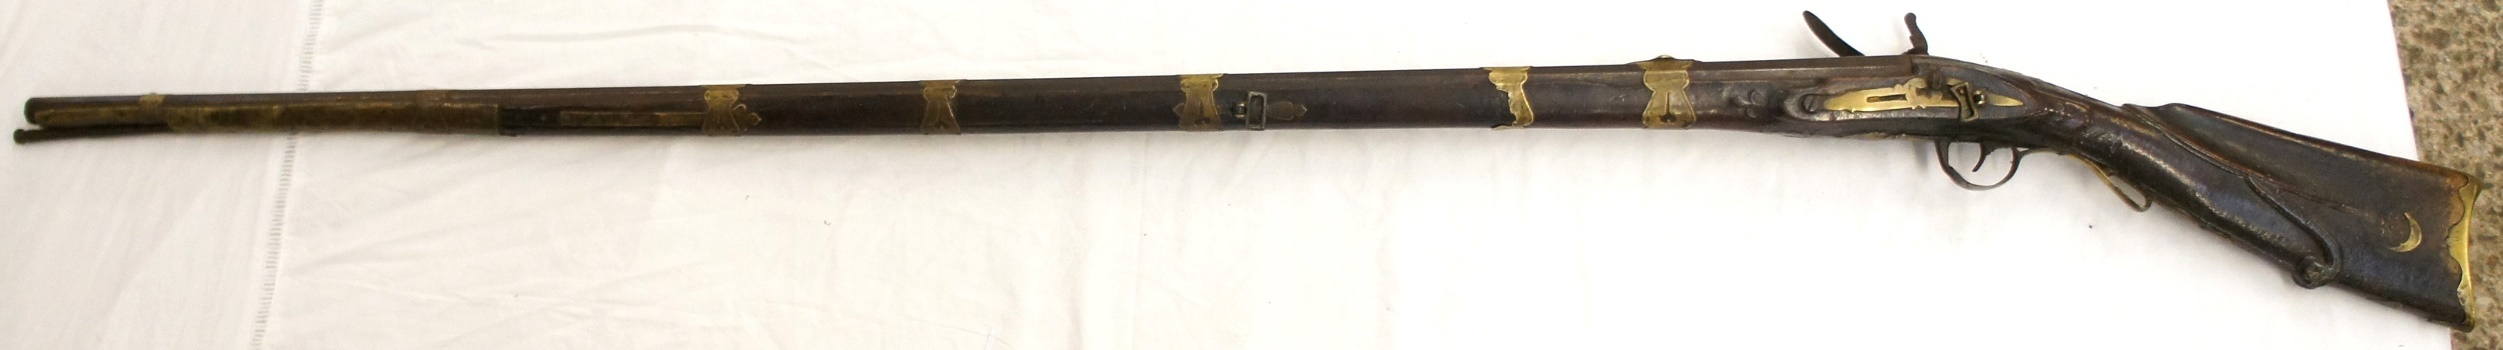 Ottoman Long Rifle Stamped Town 1587fe